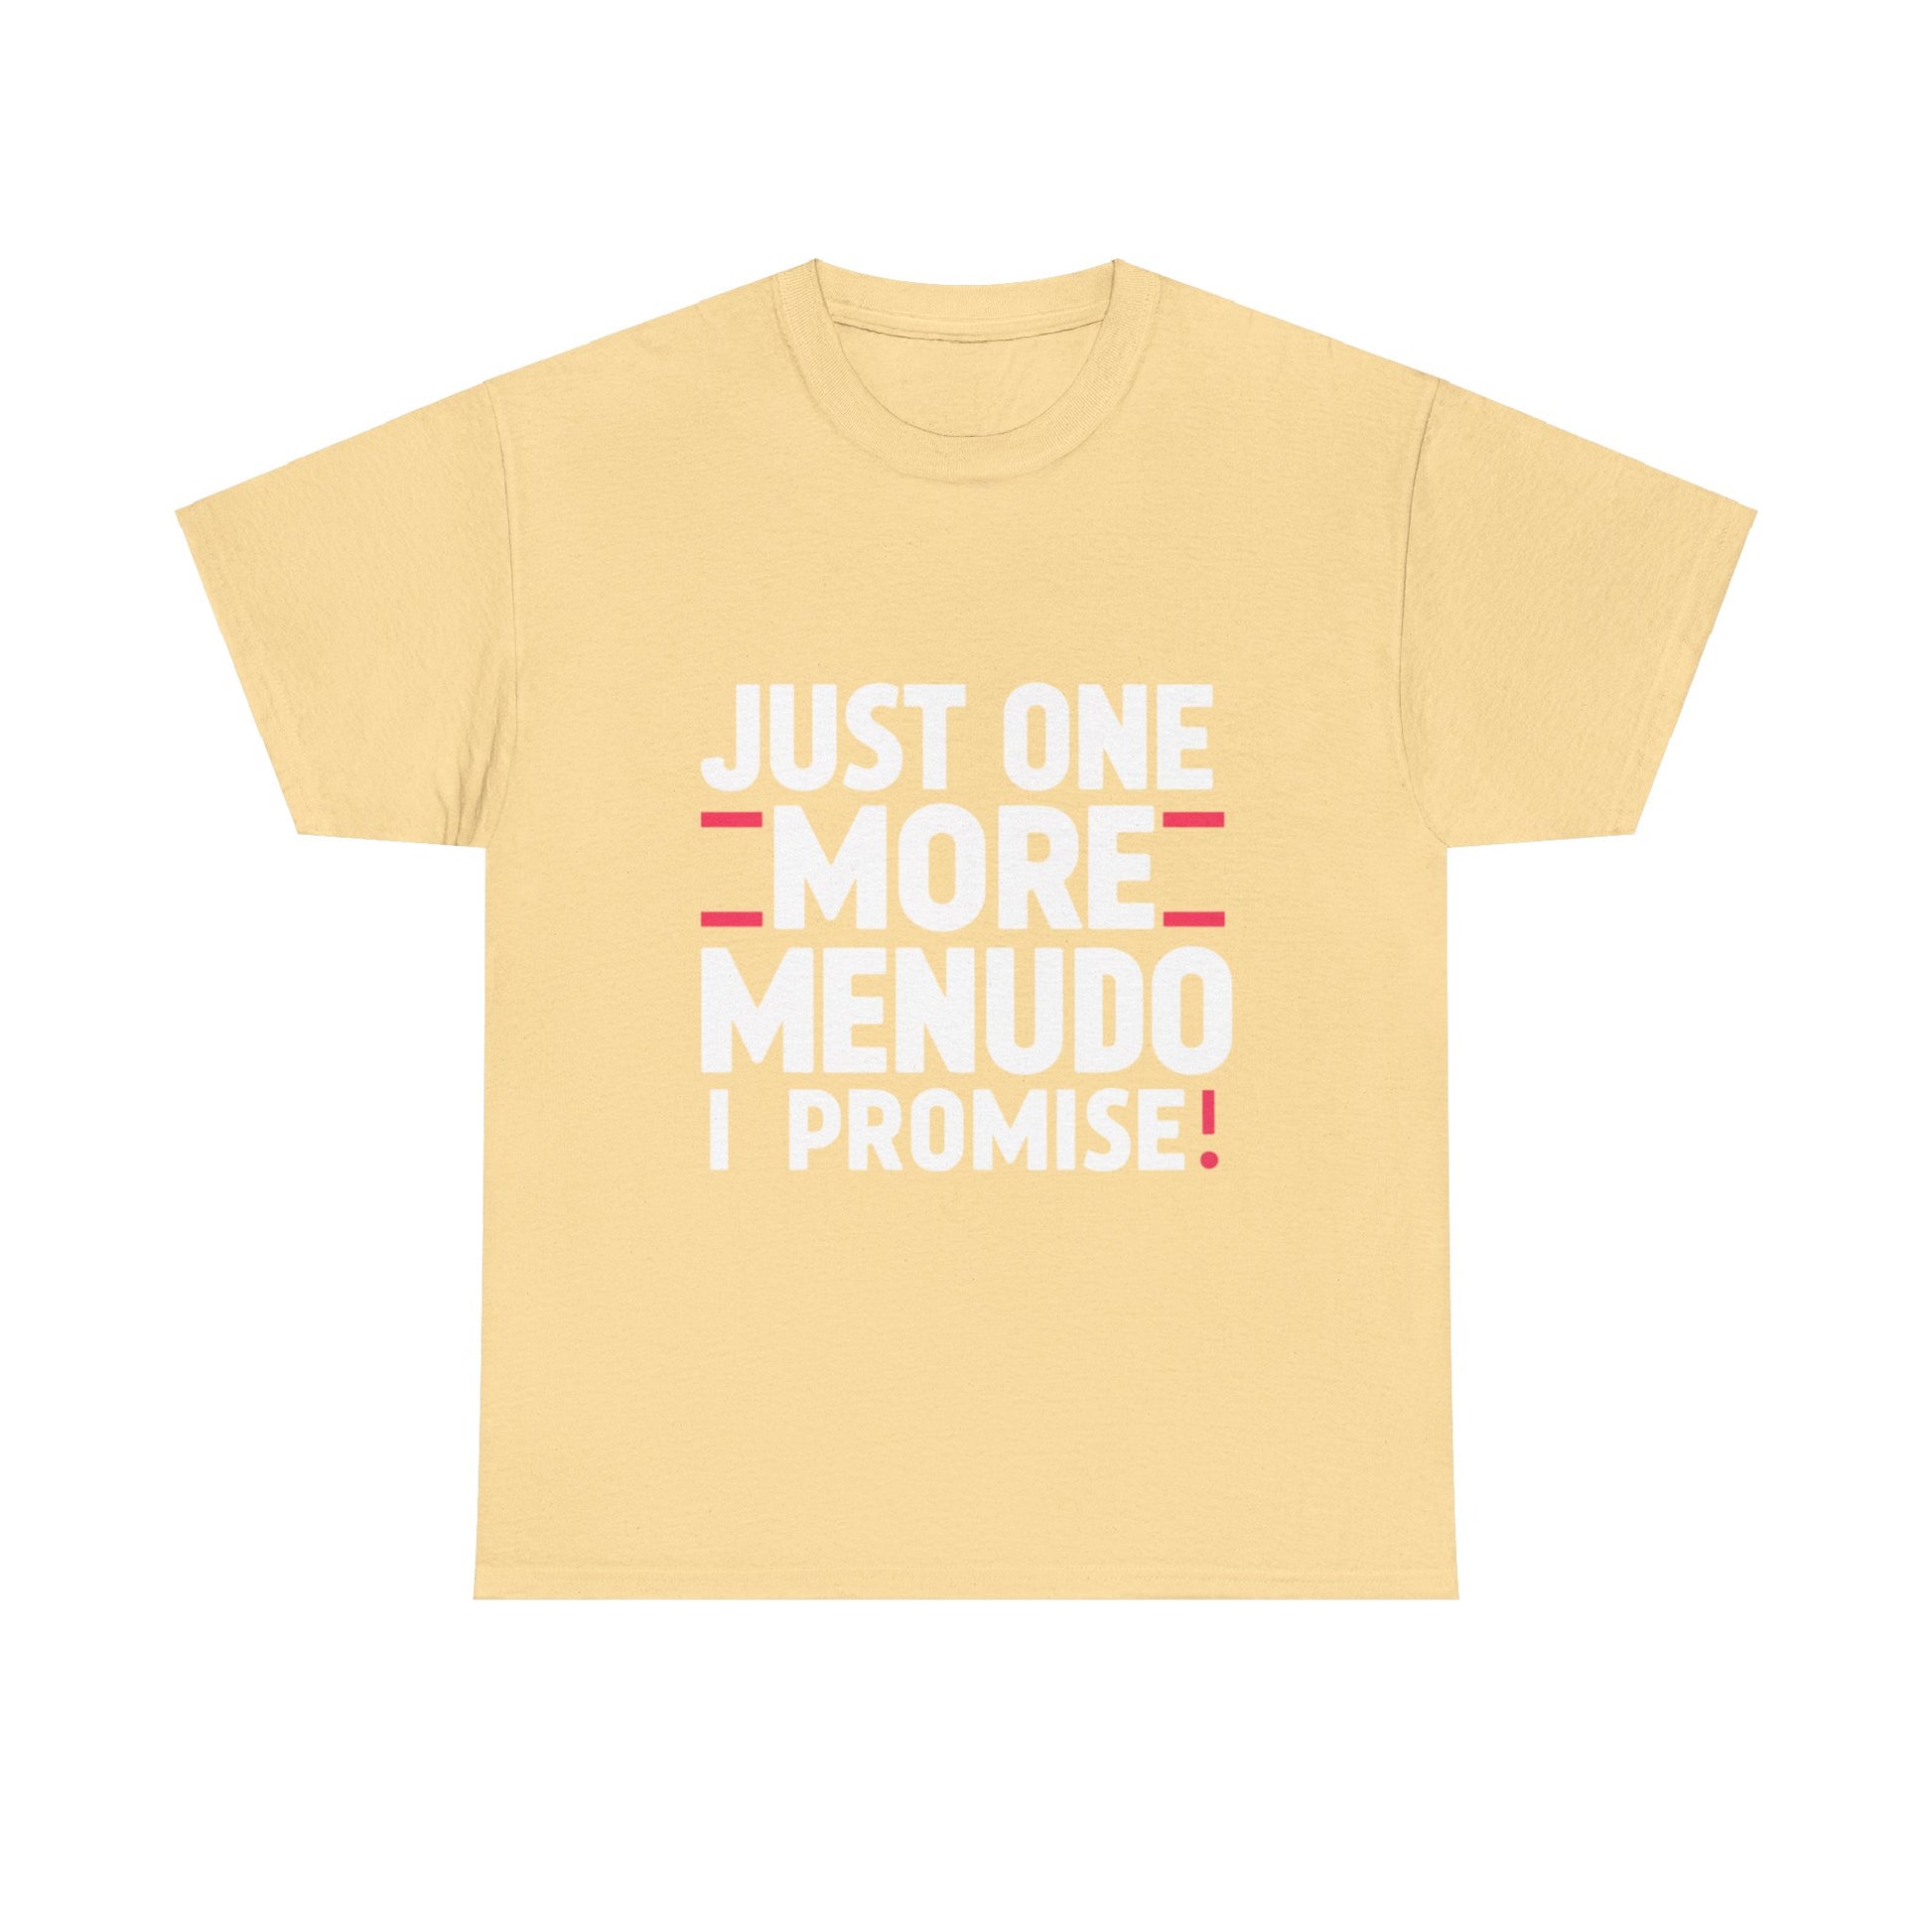 Just One More Menudo I Promise Mexican Food Graphic Unisex Heavy Cotton Tee Cotton Funny Humorous Graphic Soft Premium Unisex Men Women Yellow Haze T-shirt Birthday Gift-11